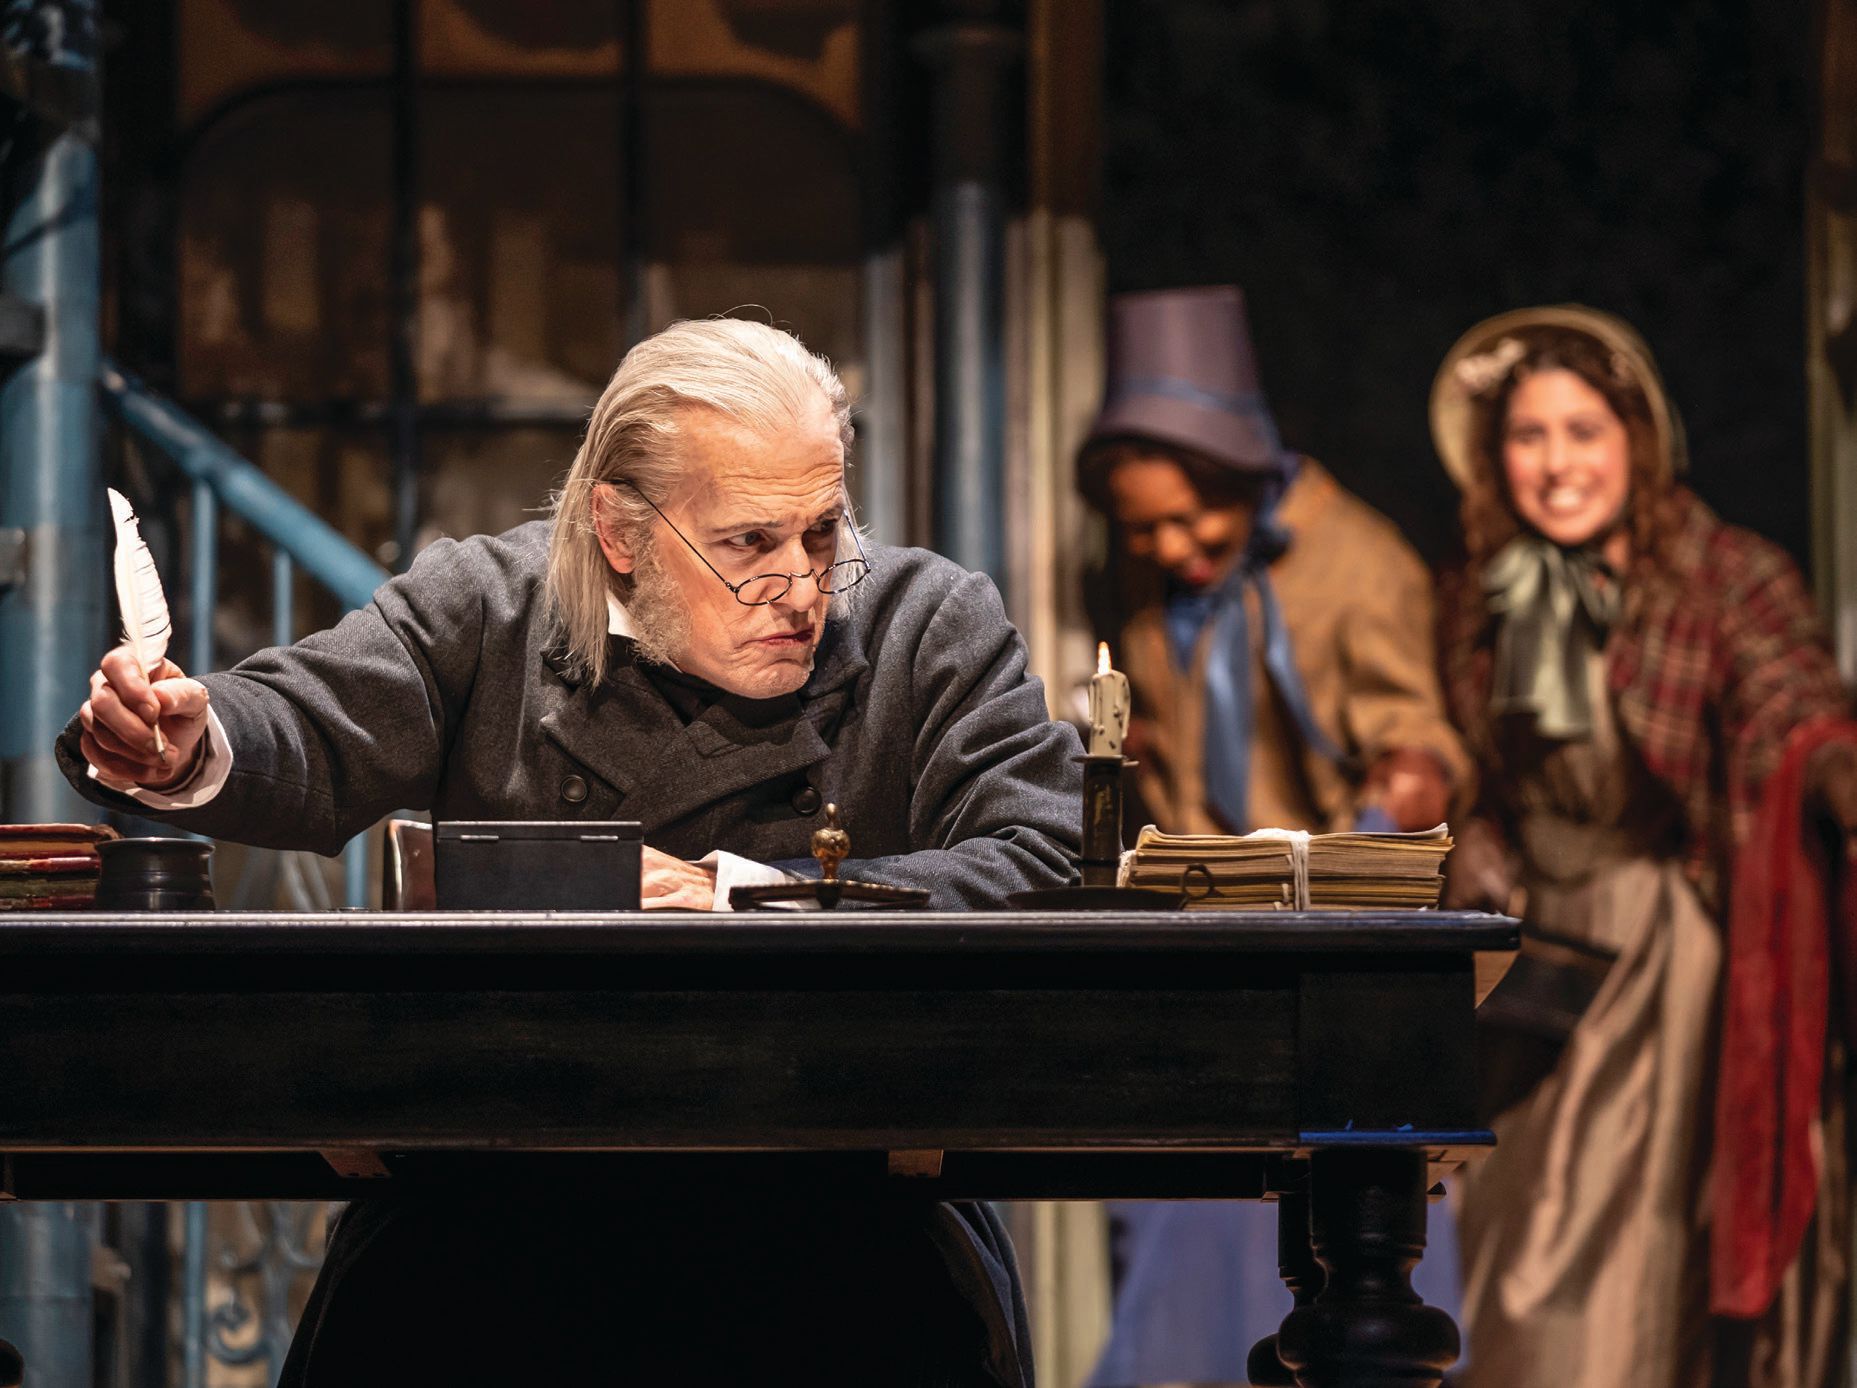 For well over a decade, Larry Yando has been the scowling face of Ebenezer Scrooge in the Goodman Theatre’s A Christmas Carol. PHOTO BY LIZ LAUREN